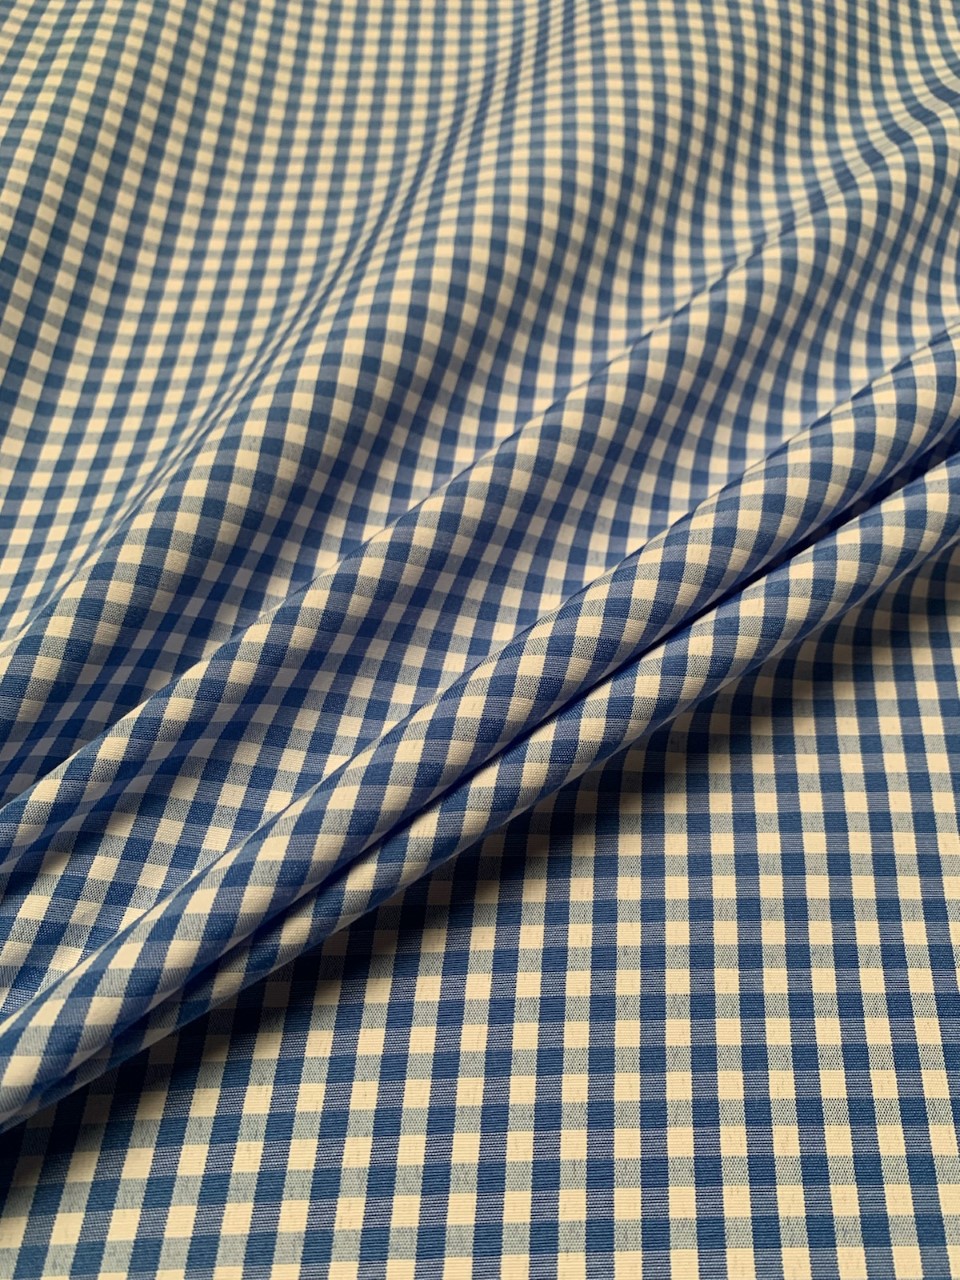 1/8" Blue Gingham Fabric 60" Wide By The Yard Poly Cotton Blend